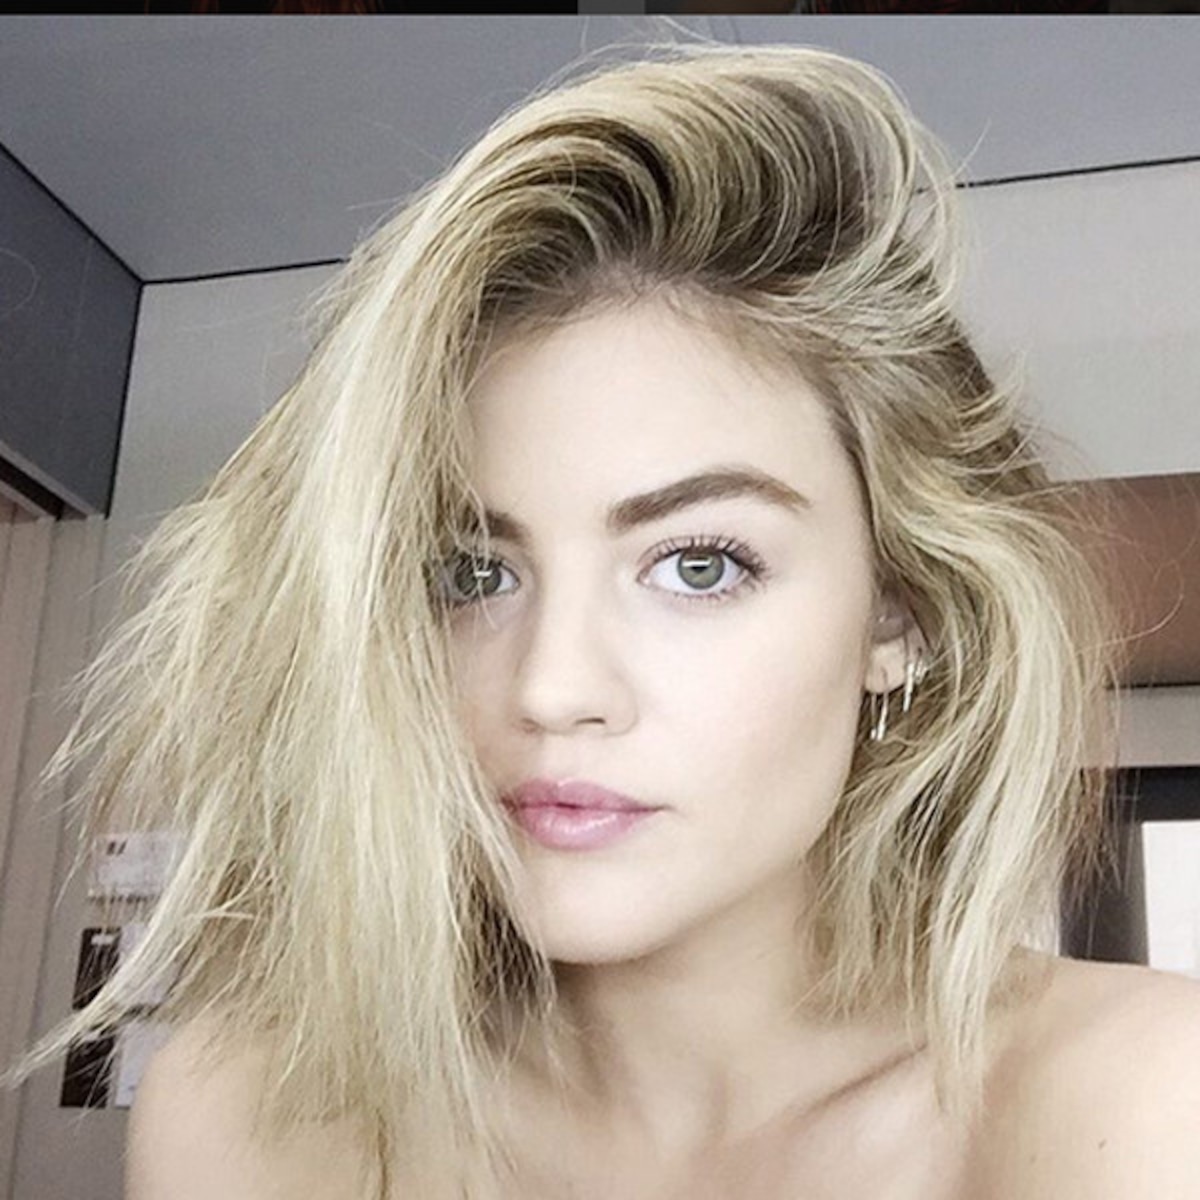 Lucy hale naked pictures